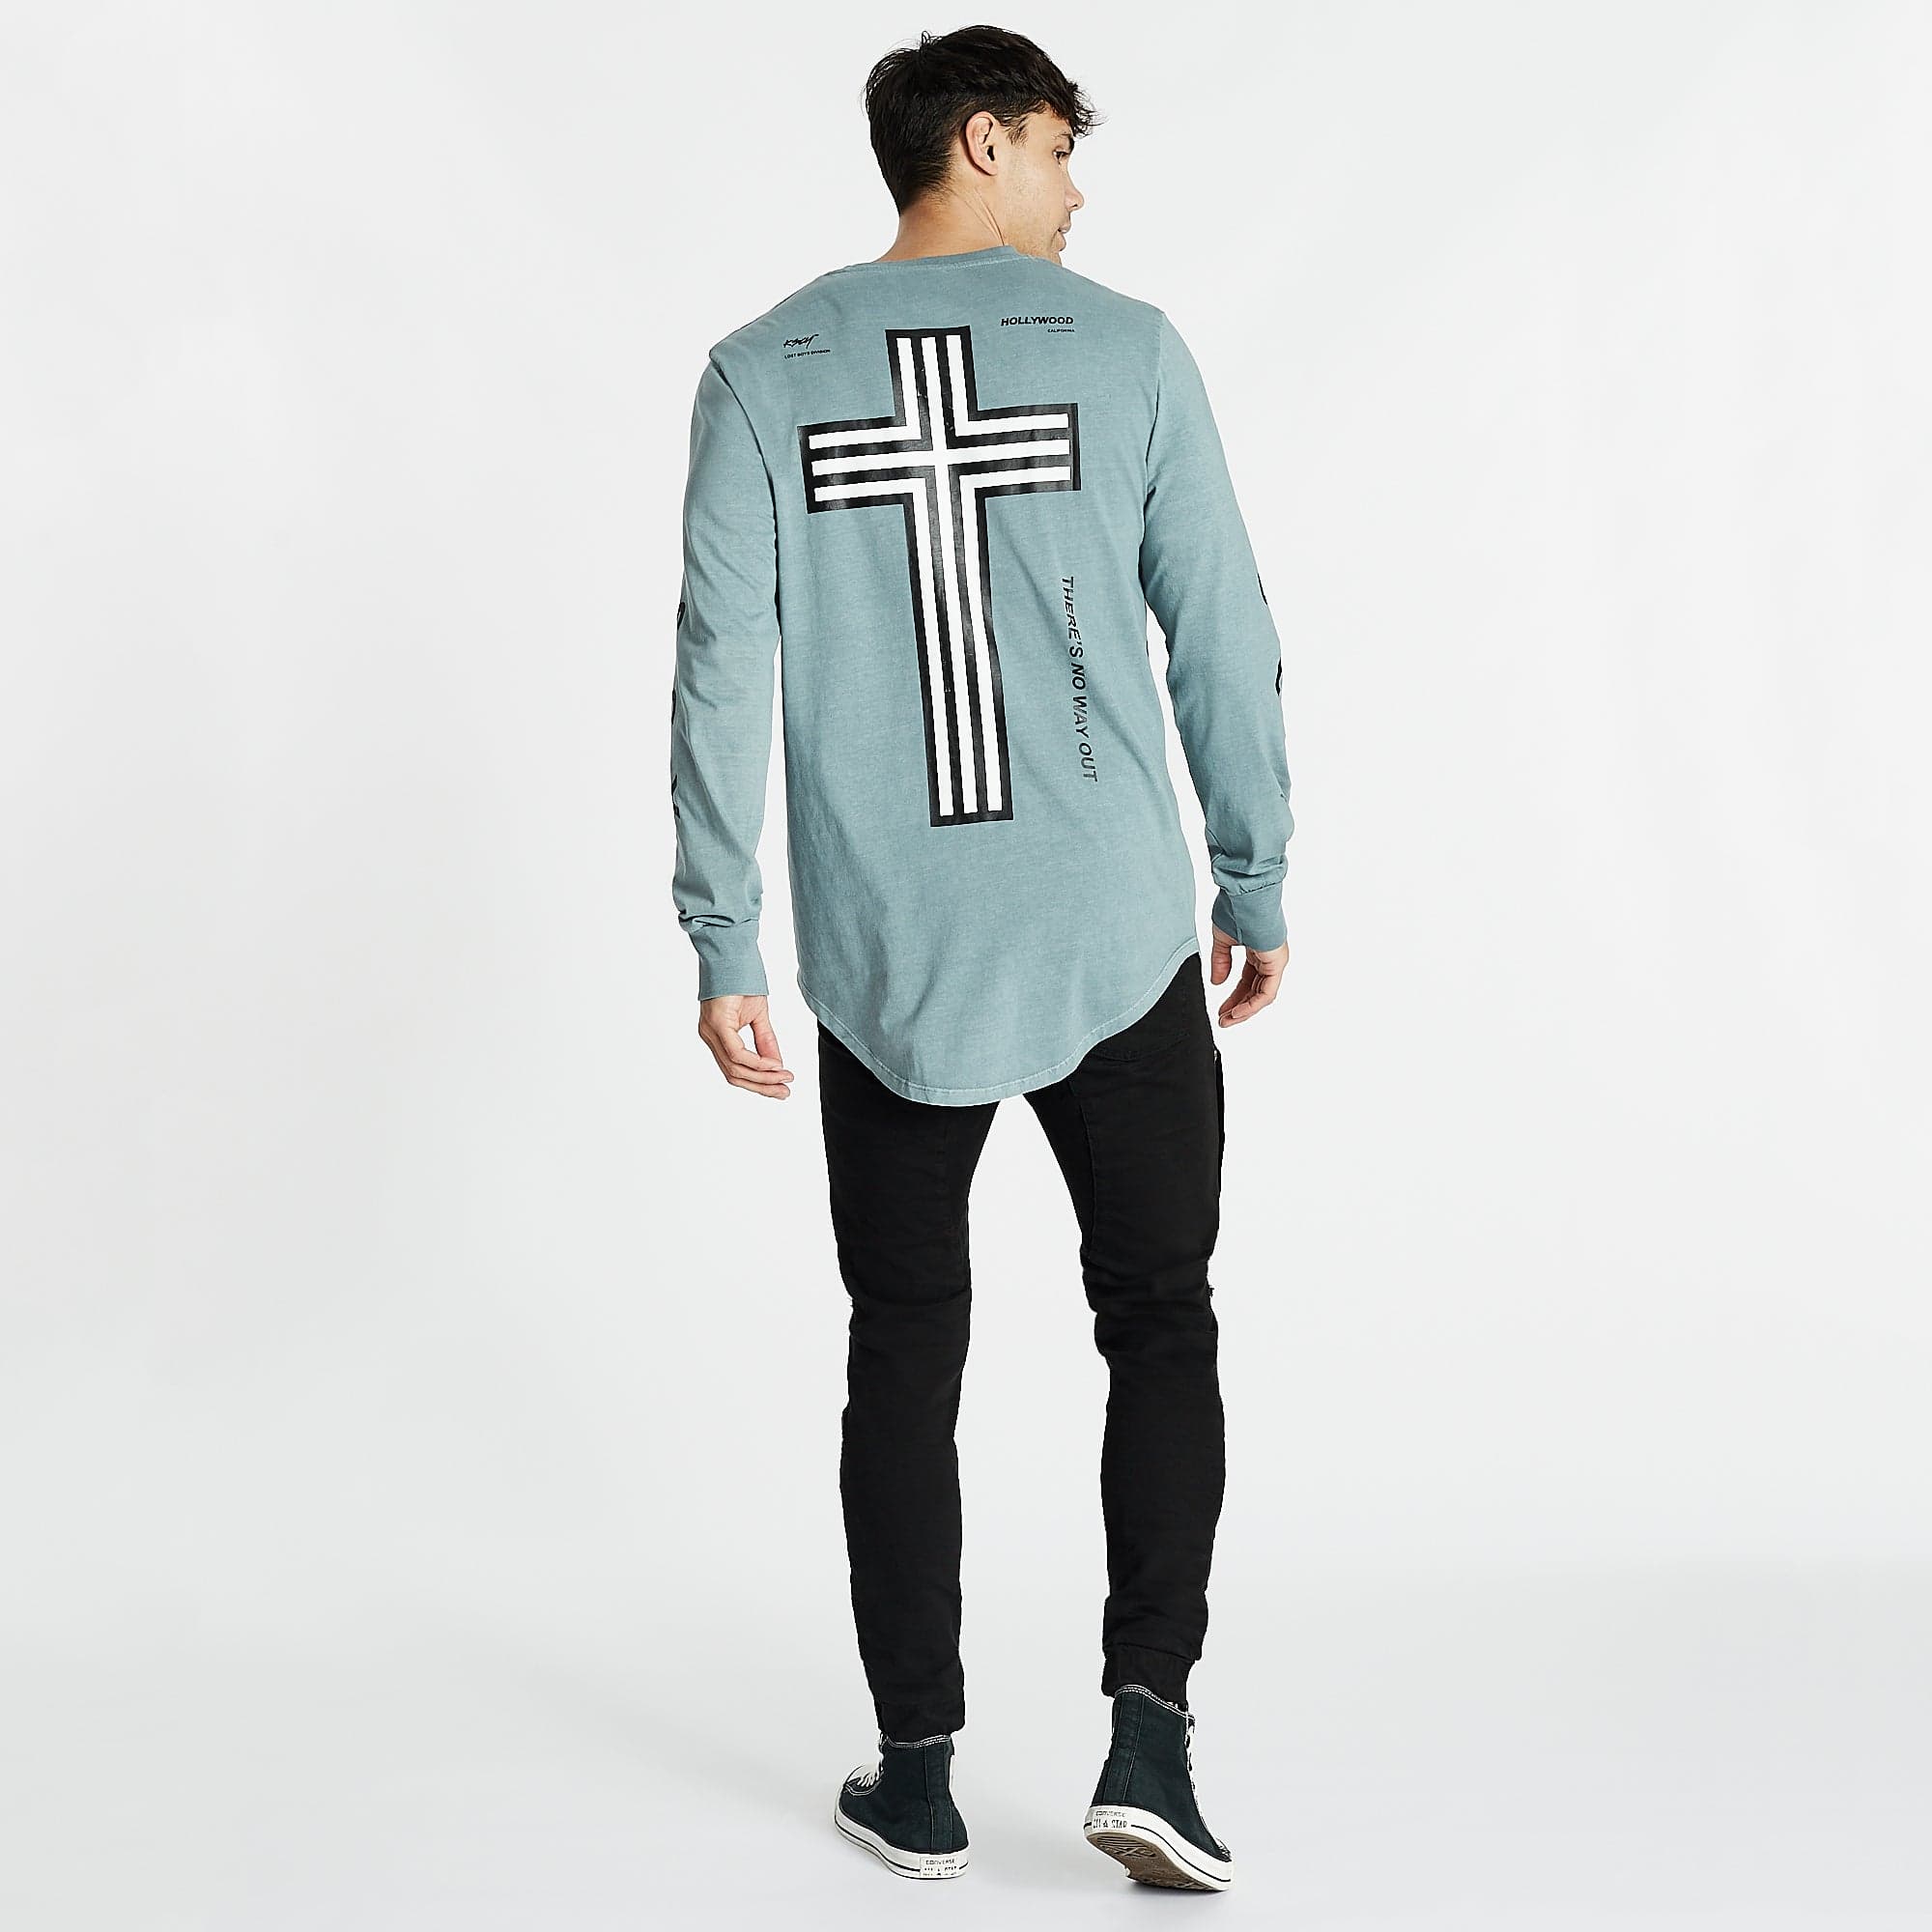 White Noise Dual Curved Long Sleeve T-Shirt Pigment Lead